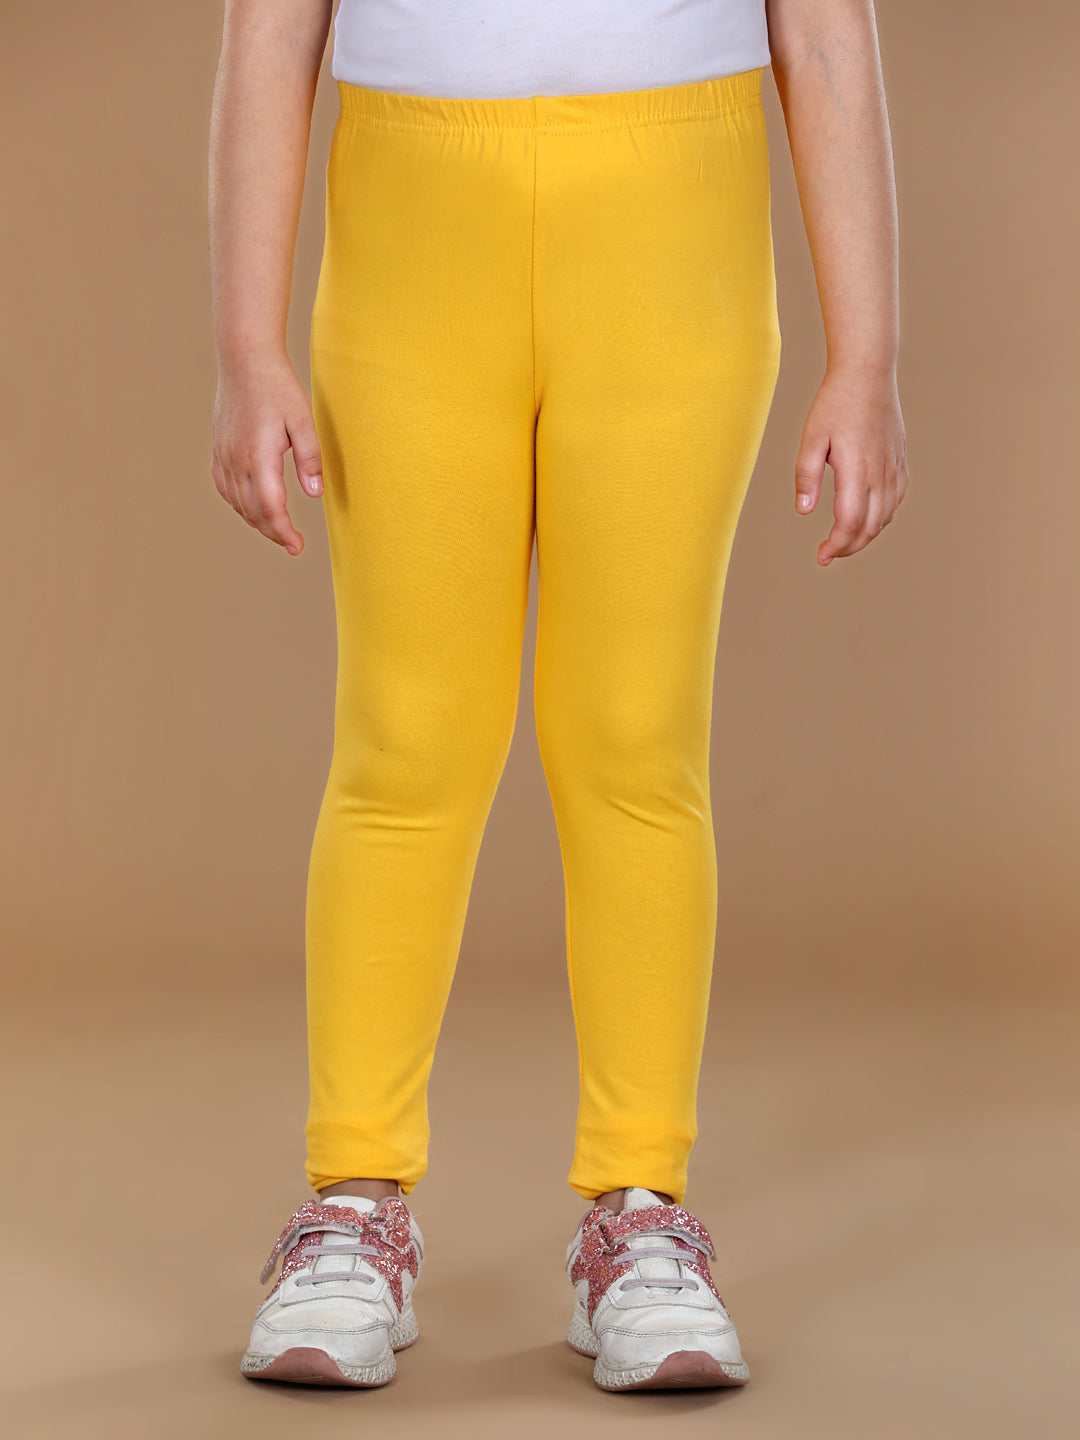 Girls Pack of 2 Solid Leggings- Yellow & Pink